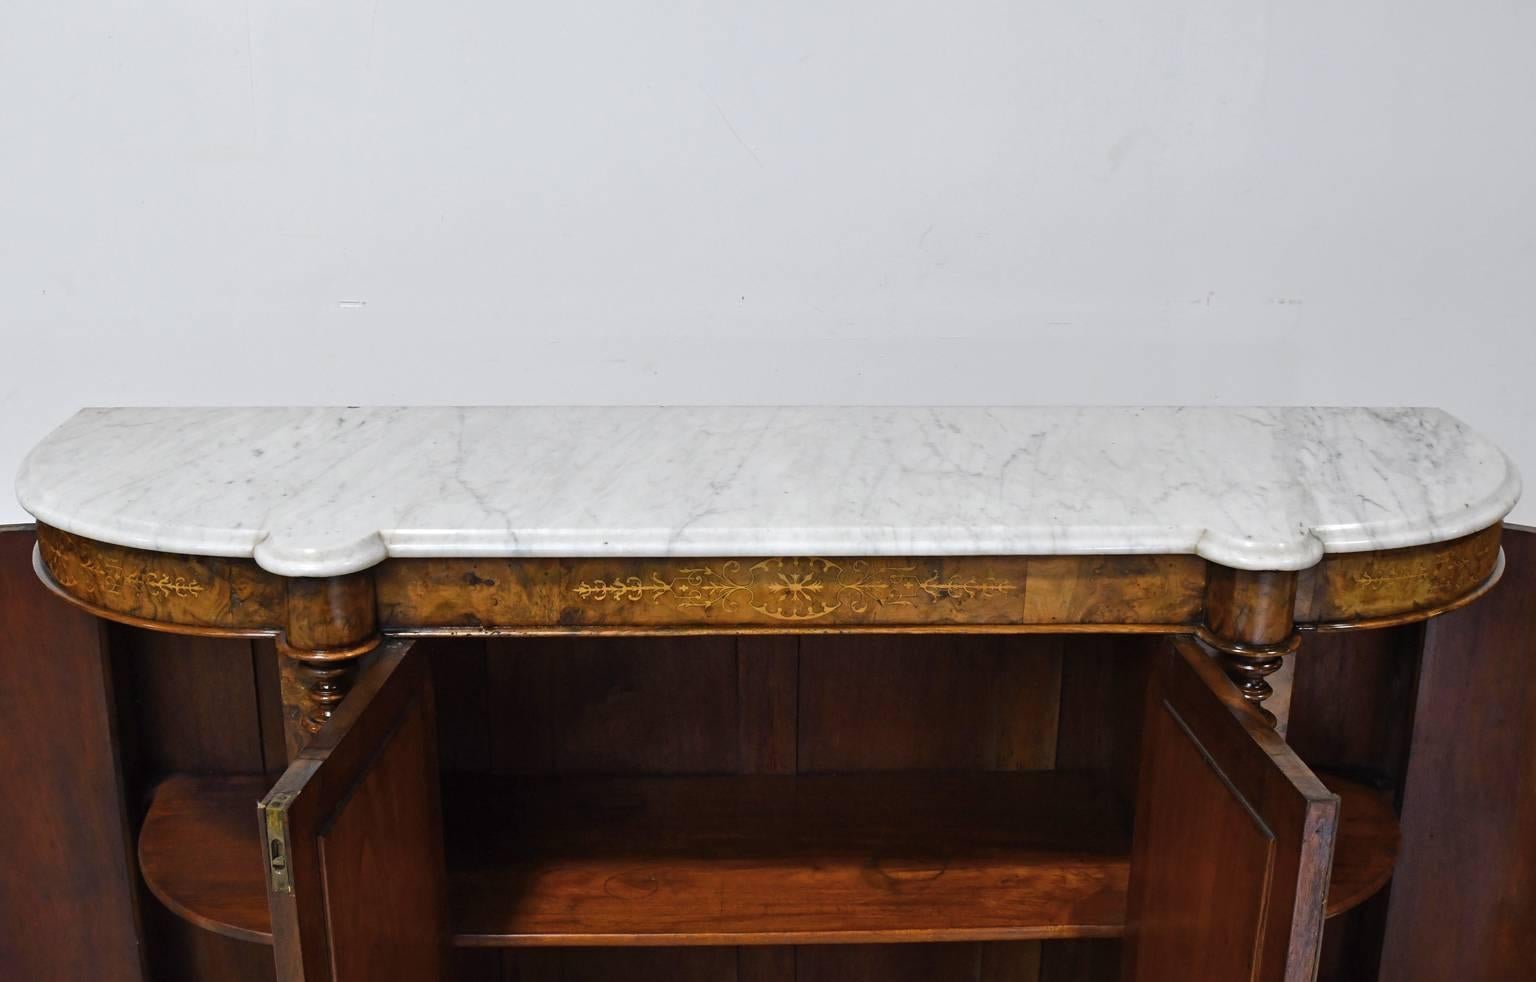 Early Victorian 19th Century English Sideboard in Burl Walnut with Marquetry withMarble Top